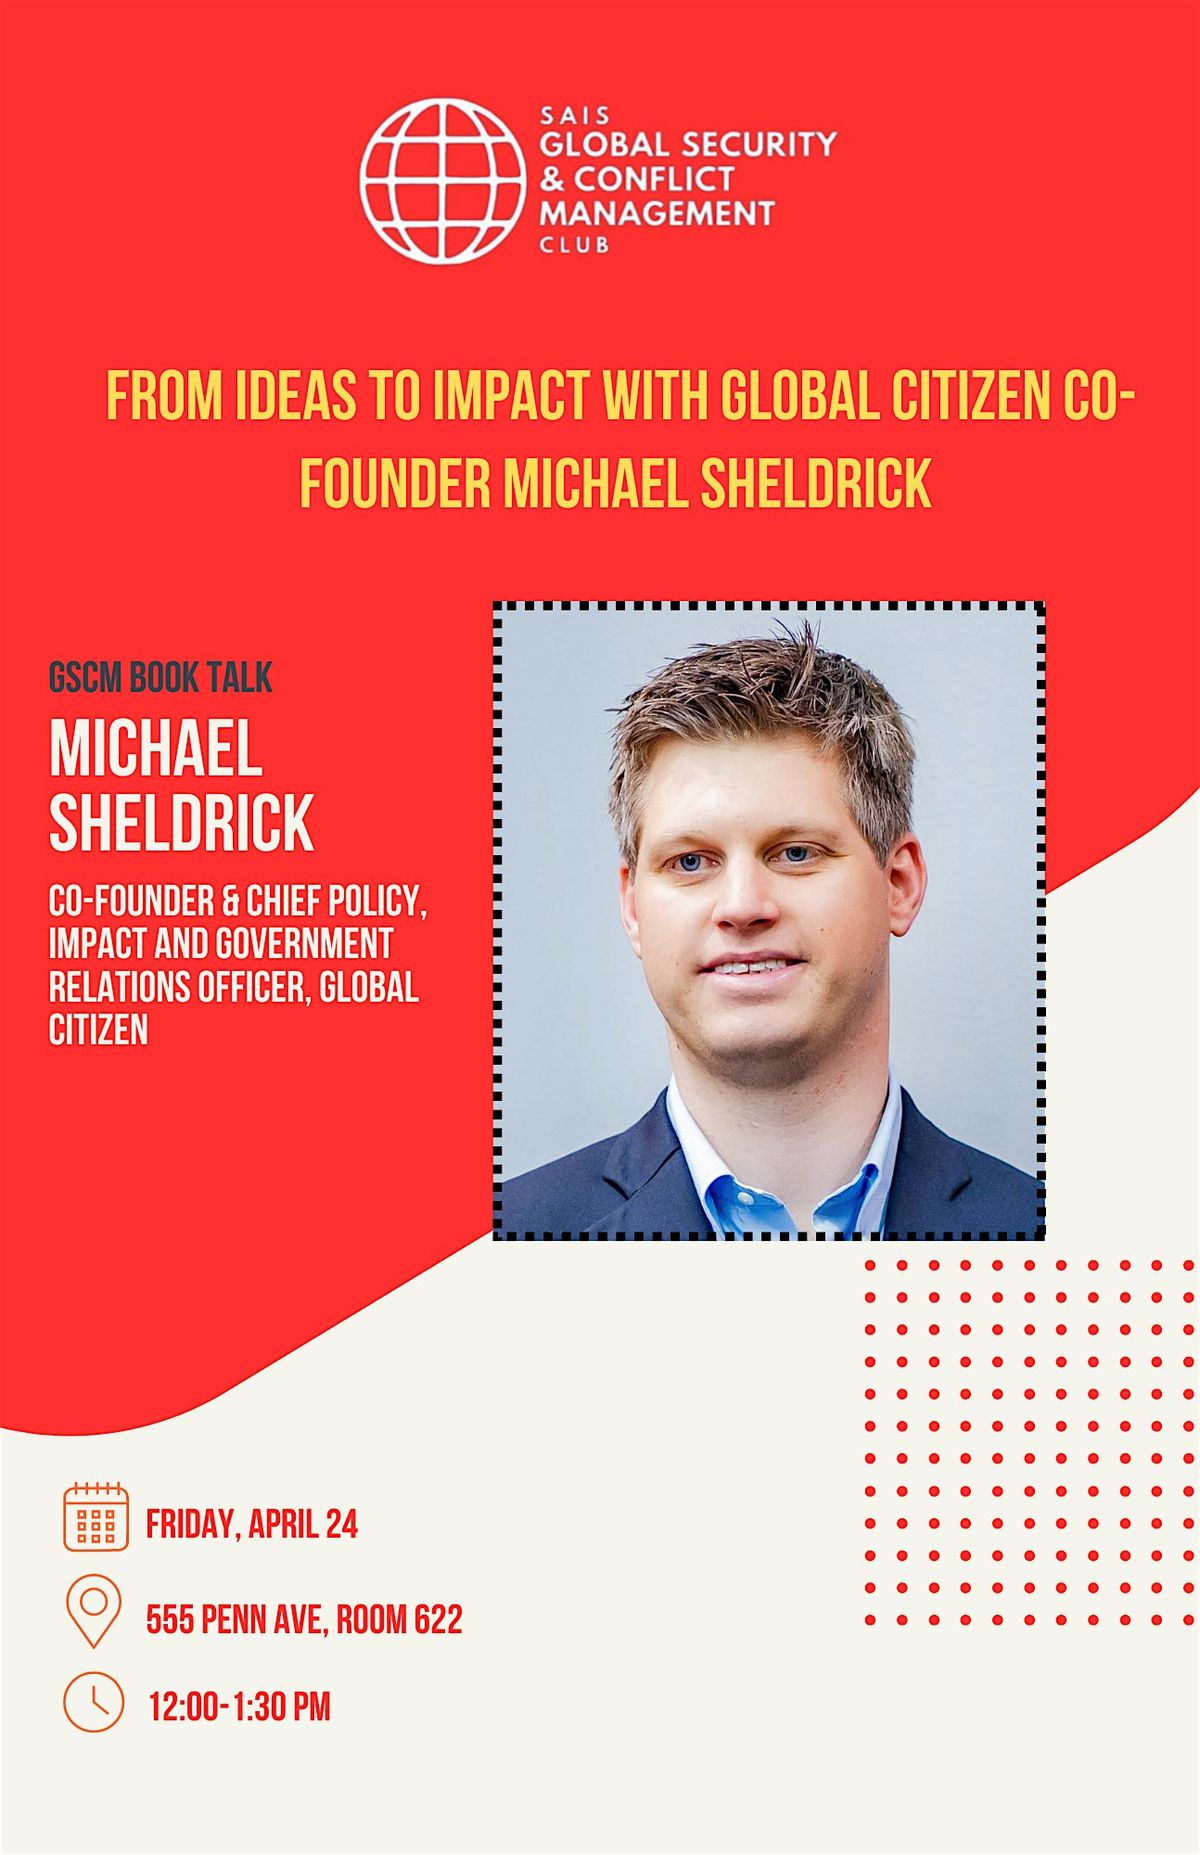 From Ideas to Impact with Global Citizen Co-Founder Michael Sheldrick